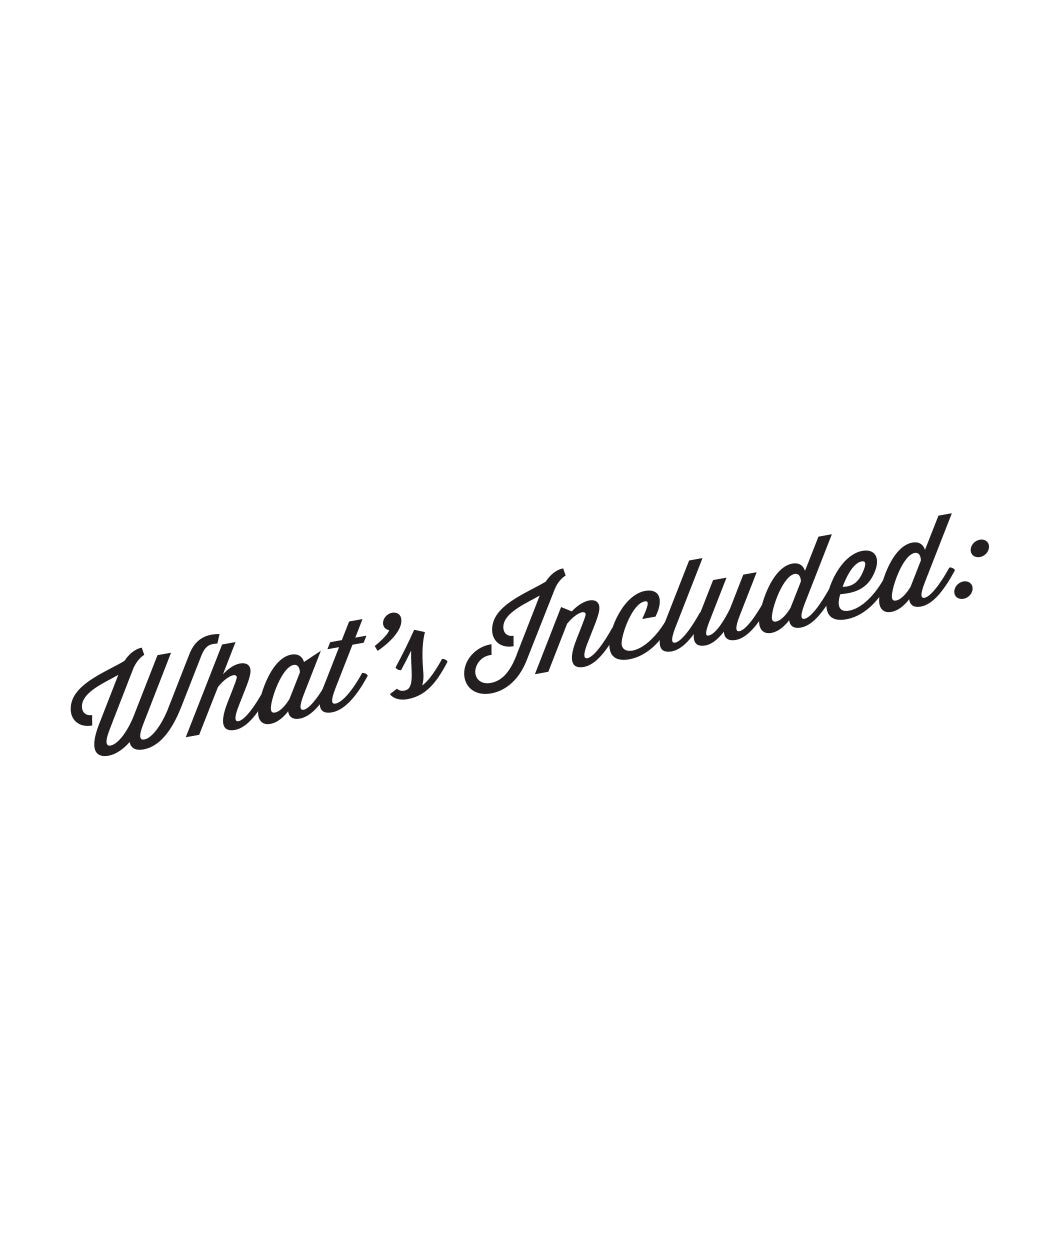 A blank white background with black text that reads "What's Included".